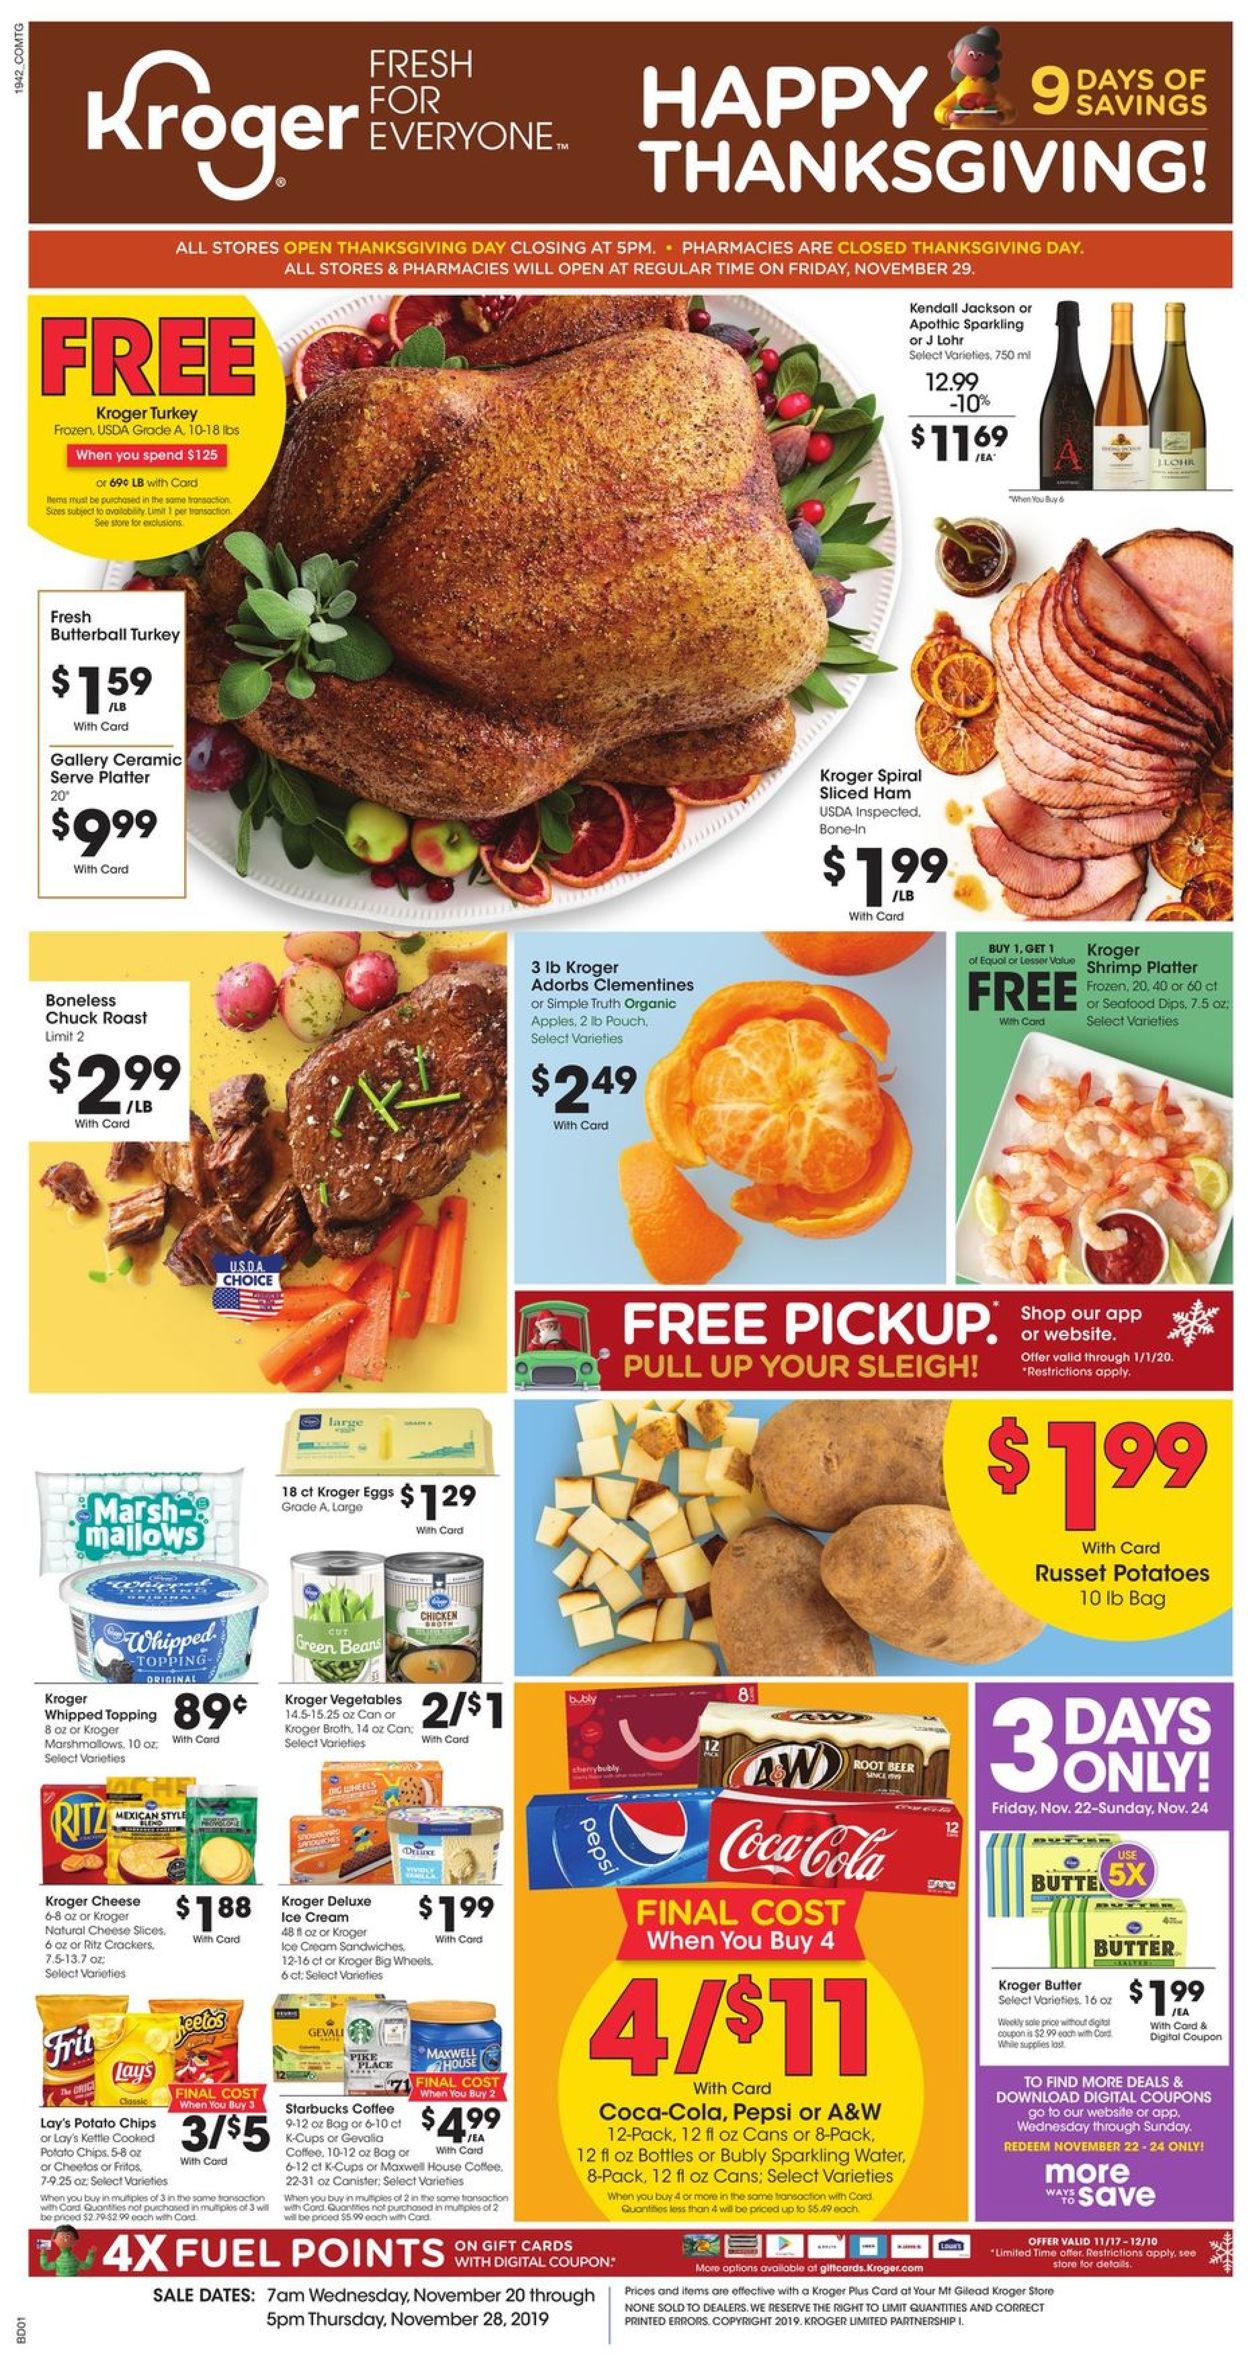 Kroger - Thanksgiving Ad 2019 Current weekly ad 11/20 - 11 ...